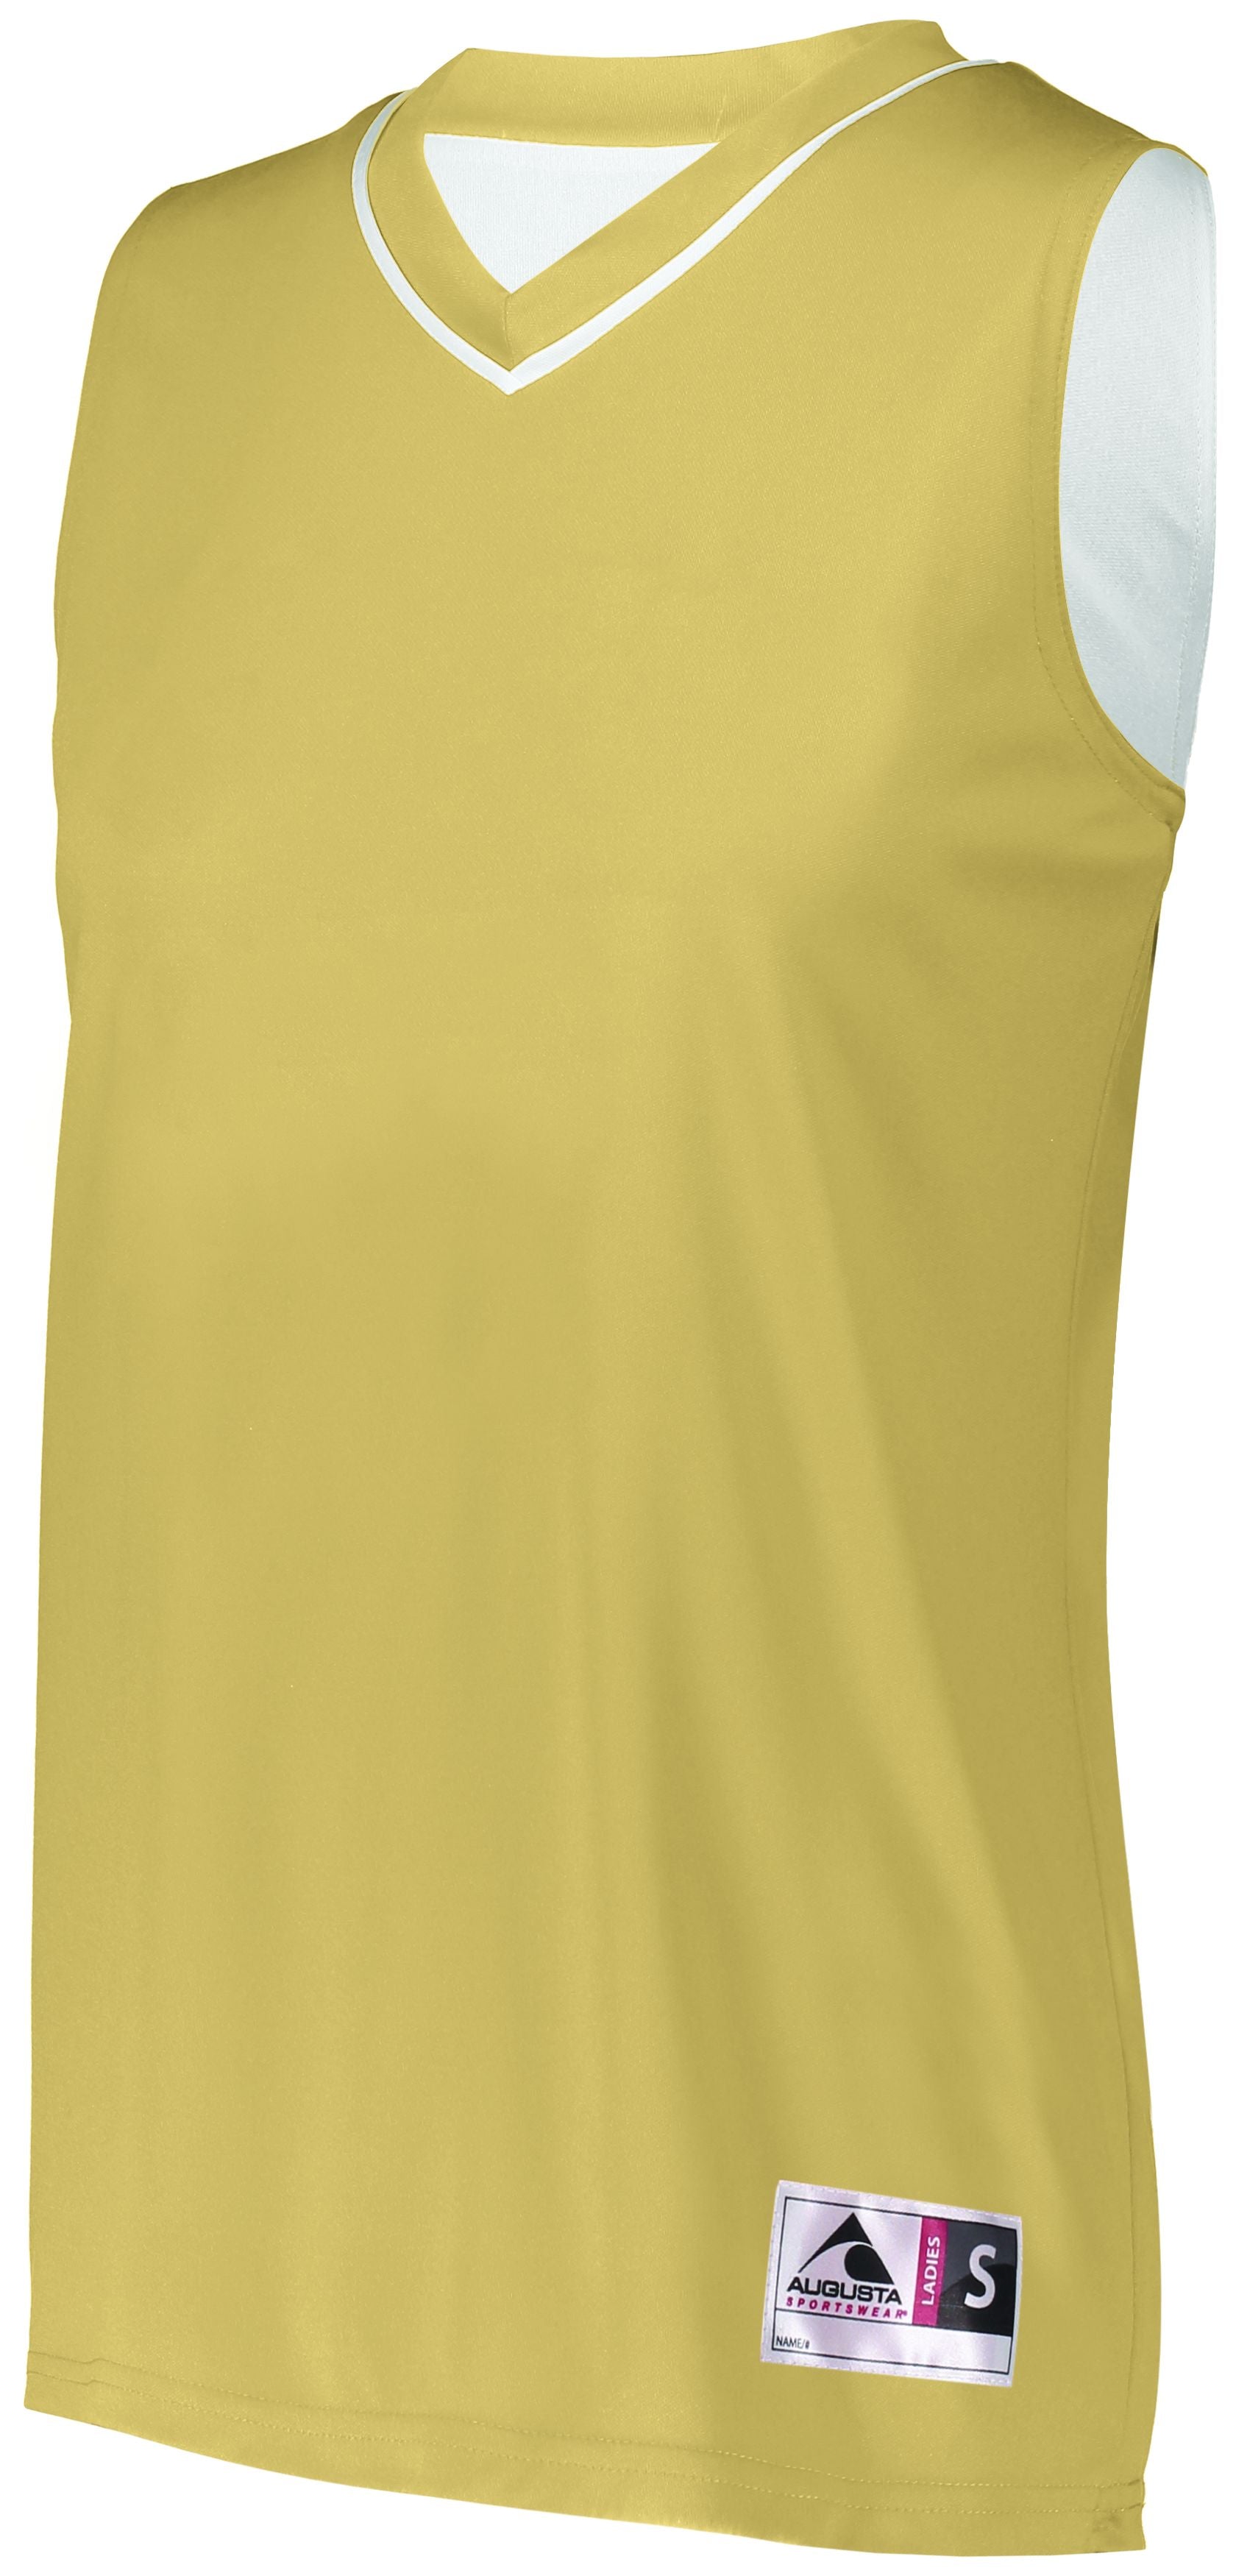 Augusta Sportswear Ladies Reversible Two-Color Jersey in Vegas Gold/White  -Part of the Ladies, Ladies-Jersey, Augusta-Products, Basketball, Shirts, All-Sports, All-Sports-1 product lines at KanaleyCreations.com